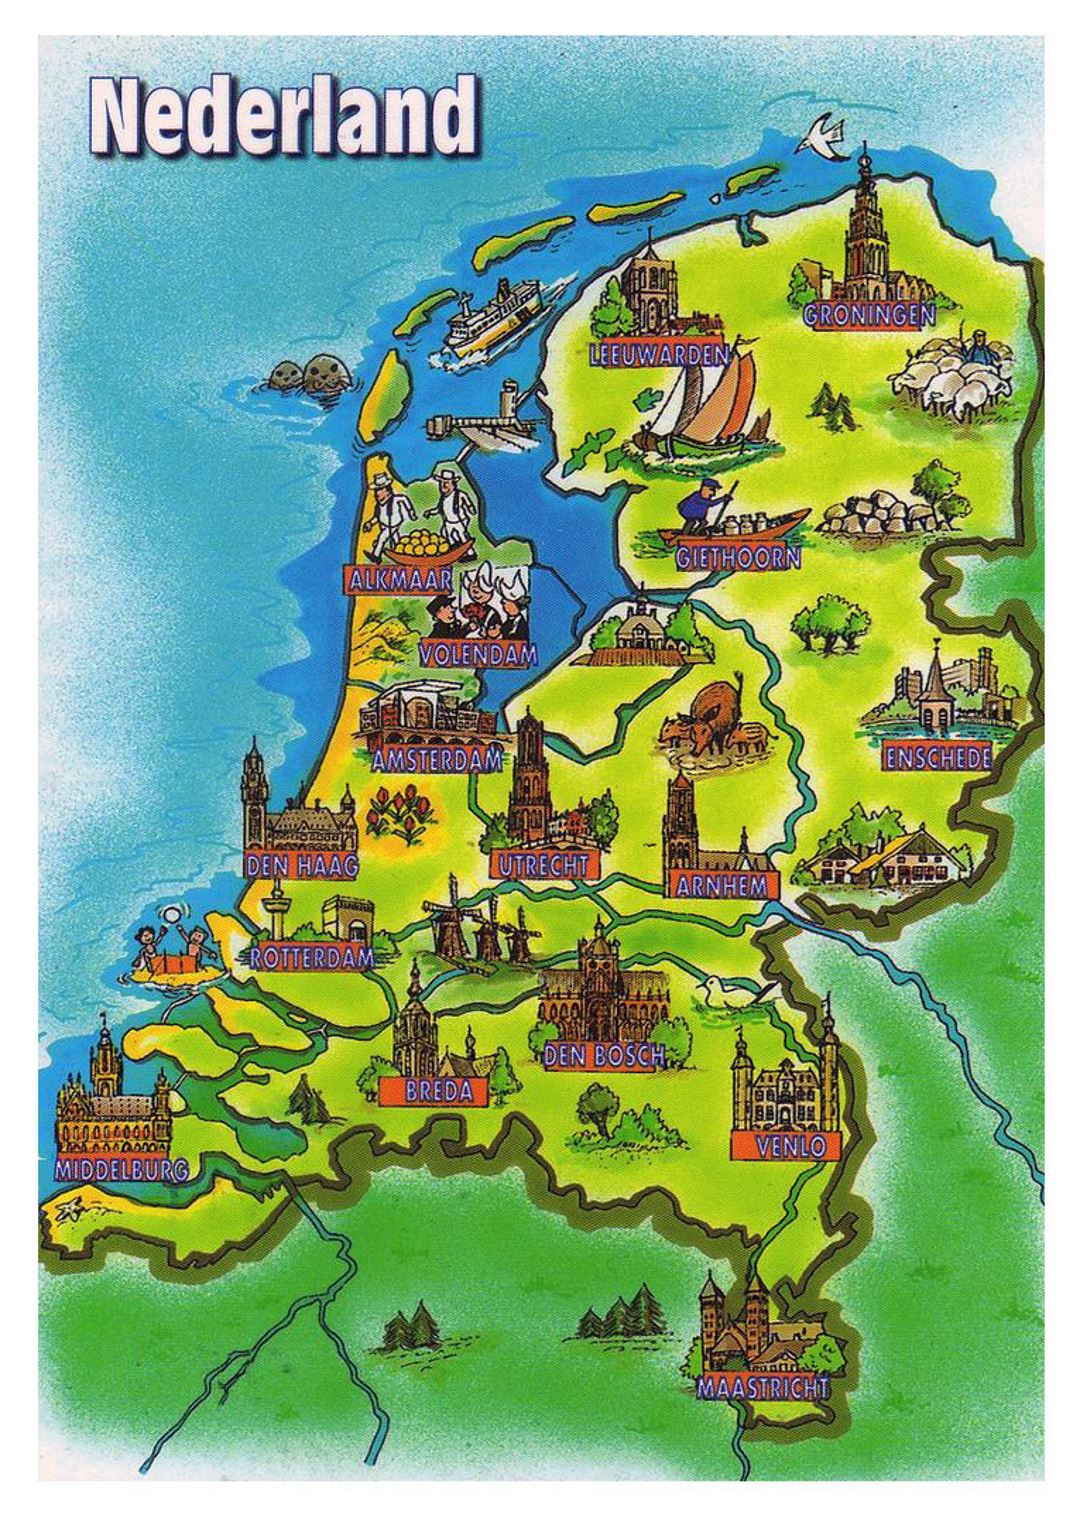 Tourist illustrated map of Netherlands